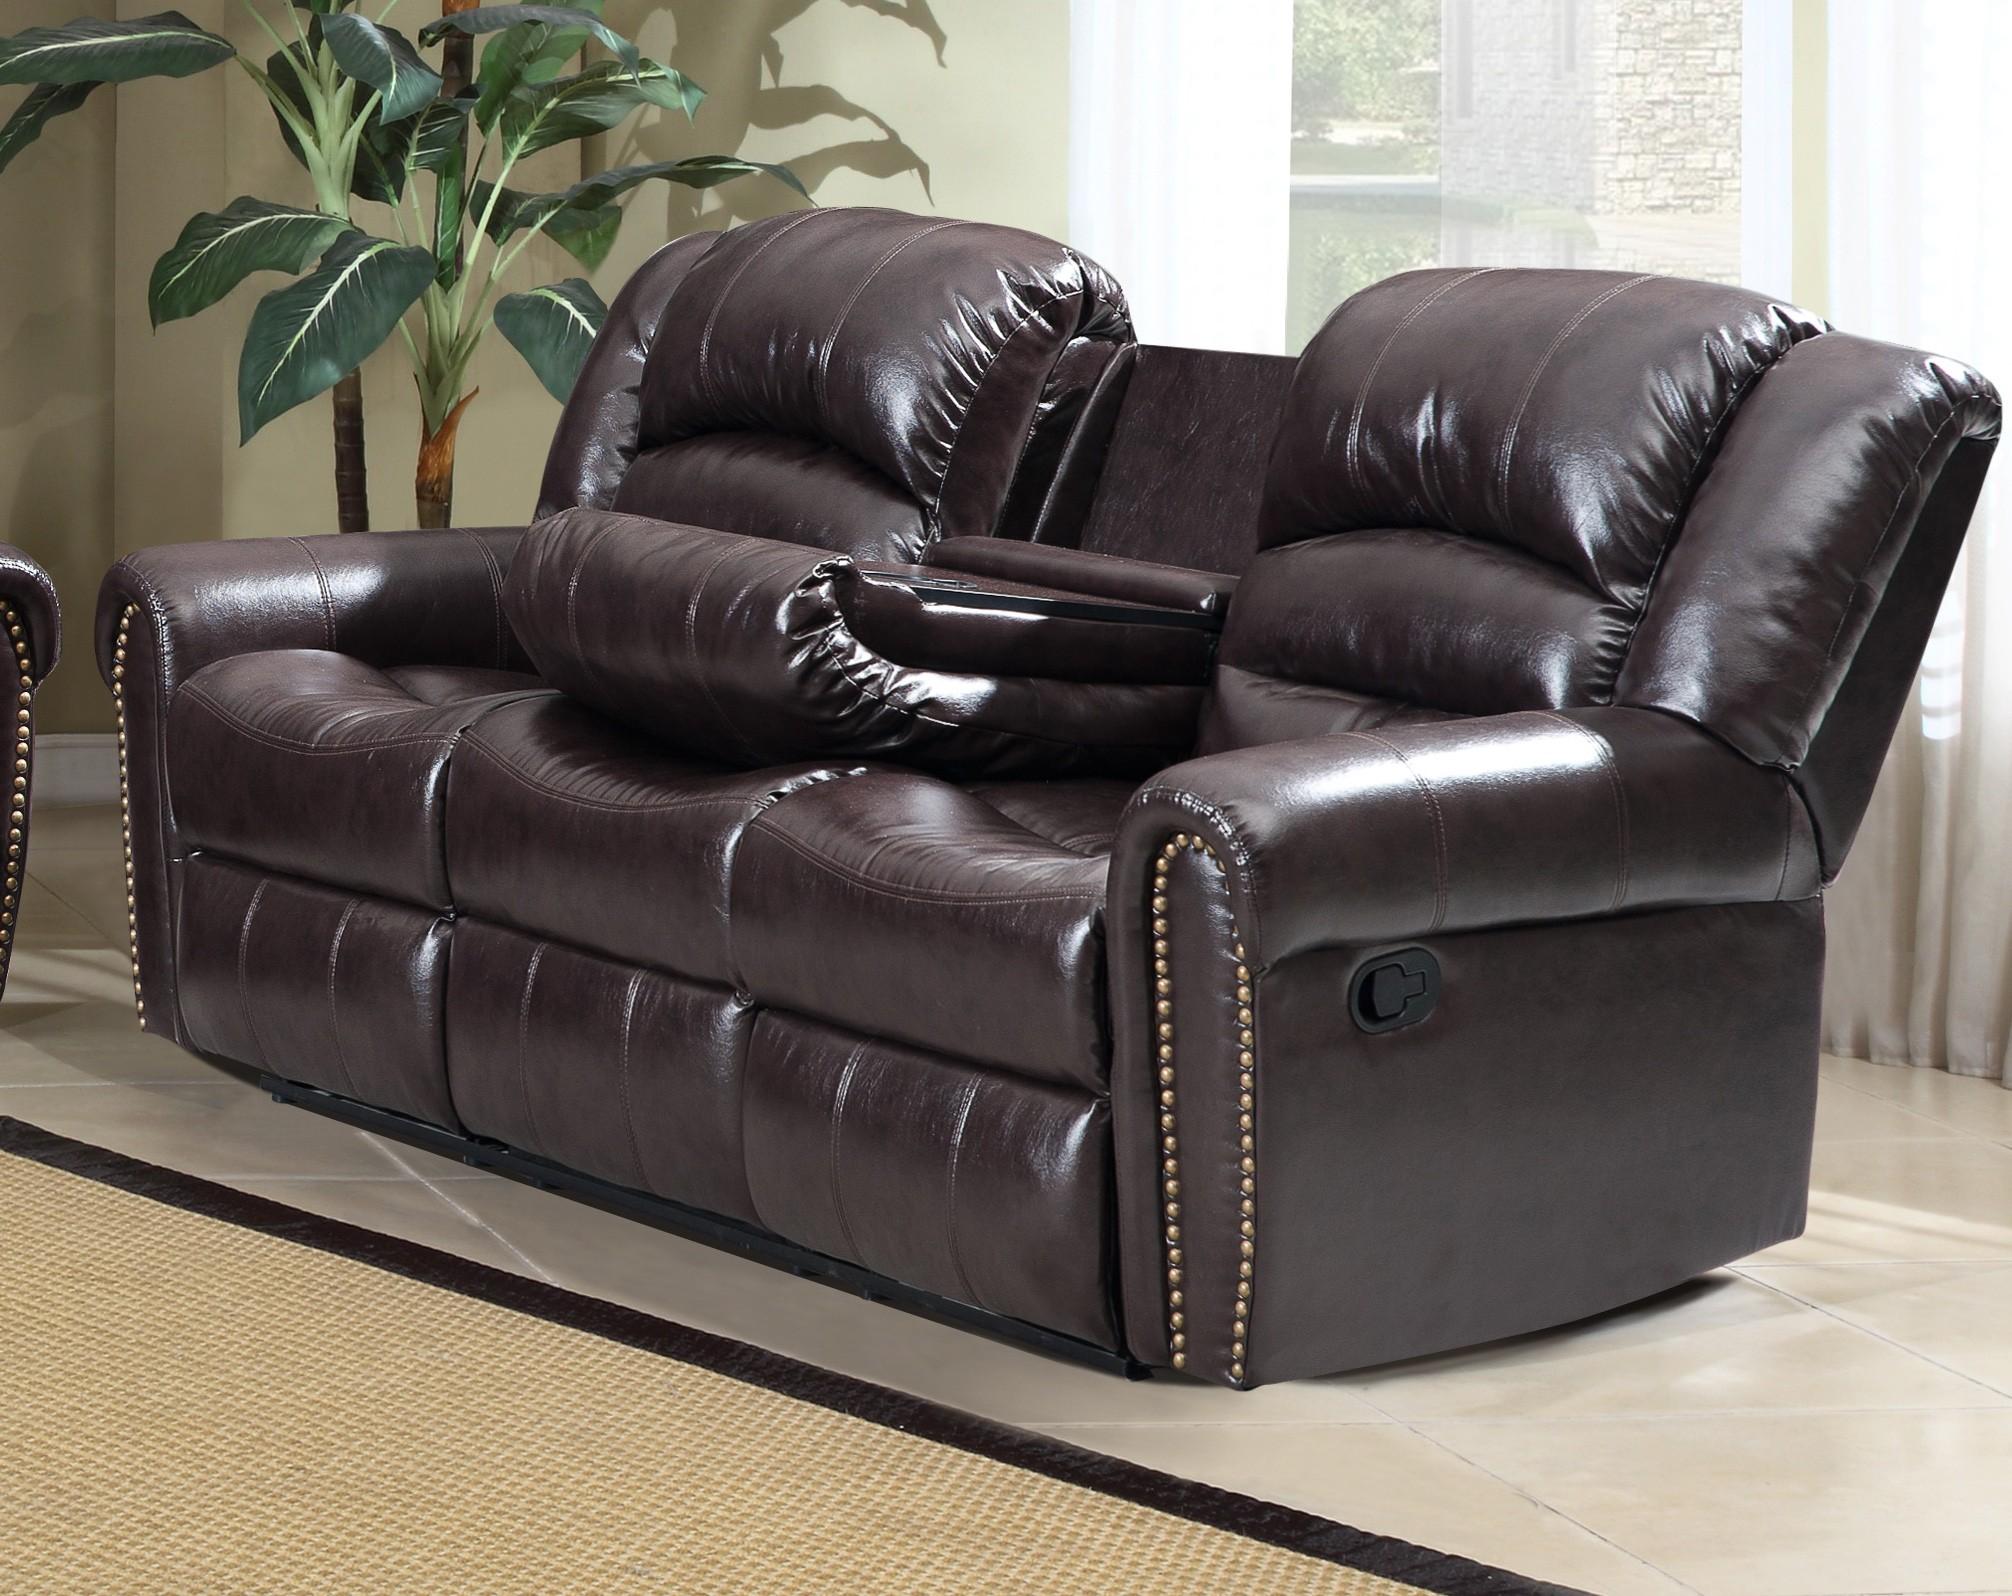 

    
Meridian 684 Chelsea Living Room Set 2pcs in Brown Bonded Leather Contemporary
